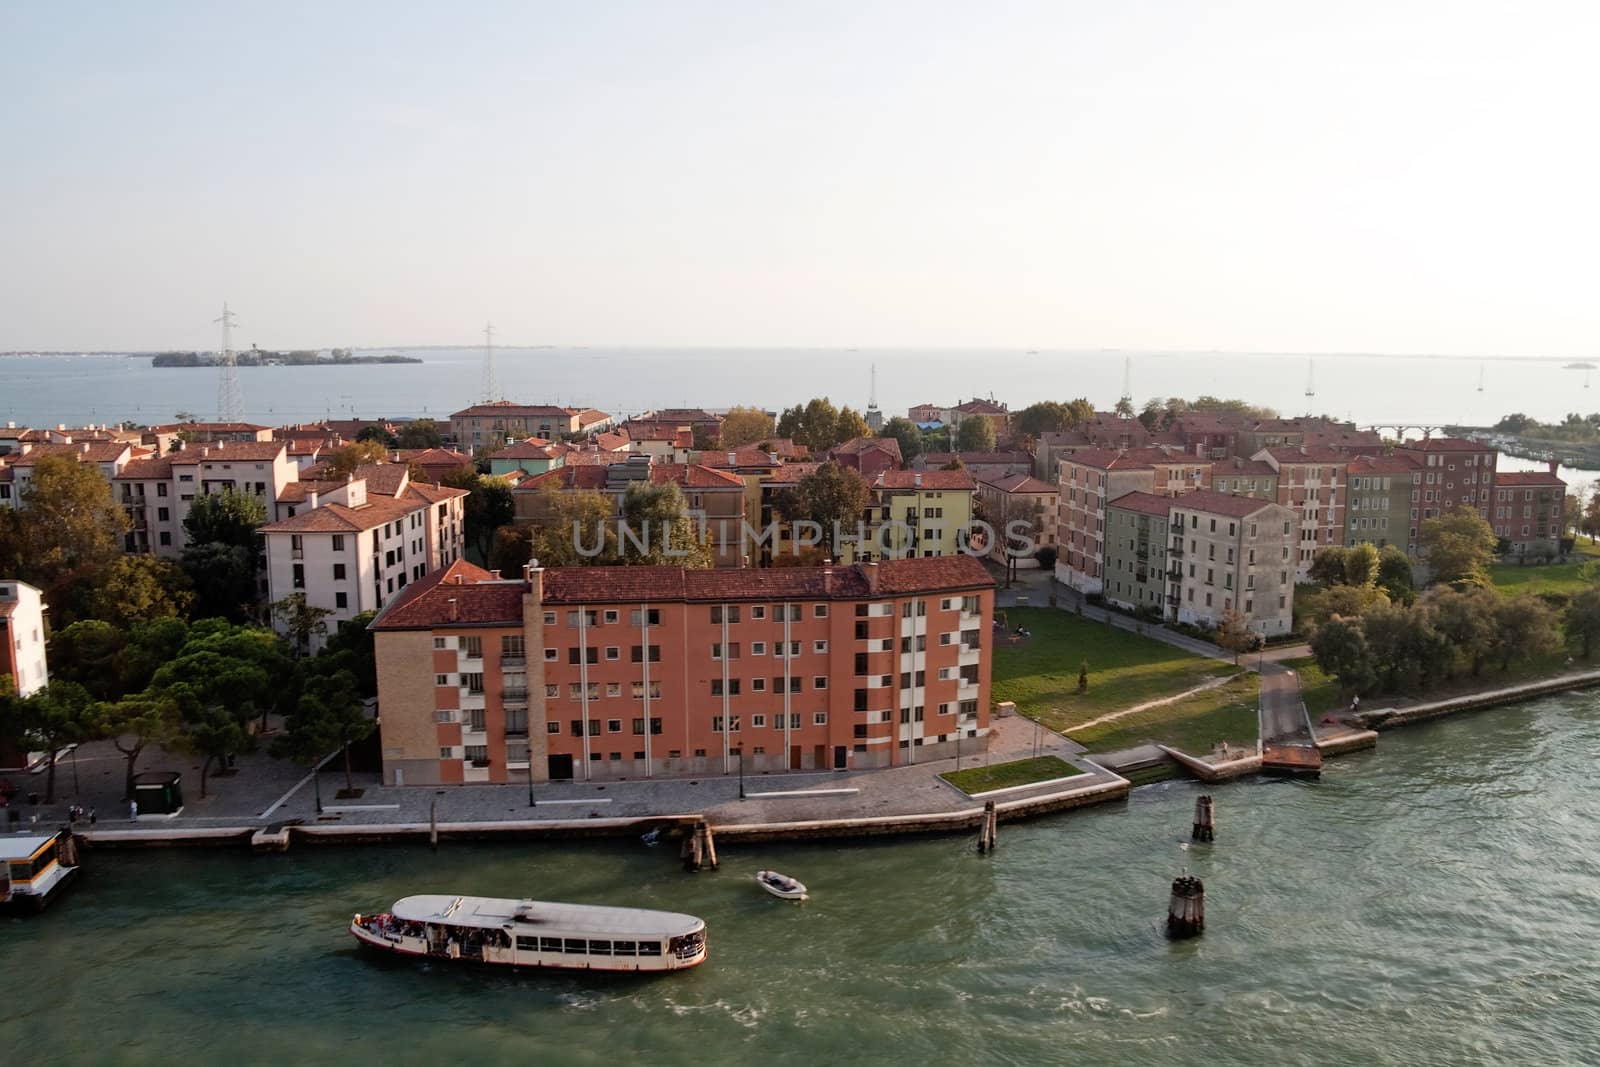 A cityscape view of Venice, Italy from high above the water.